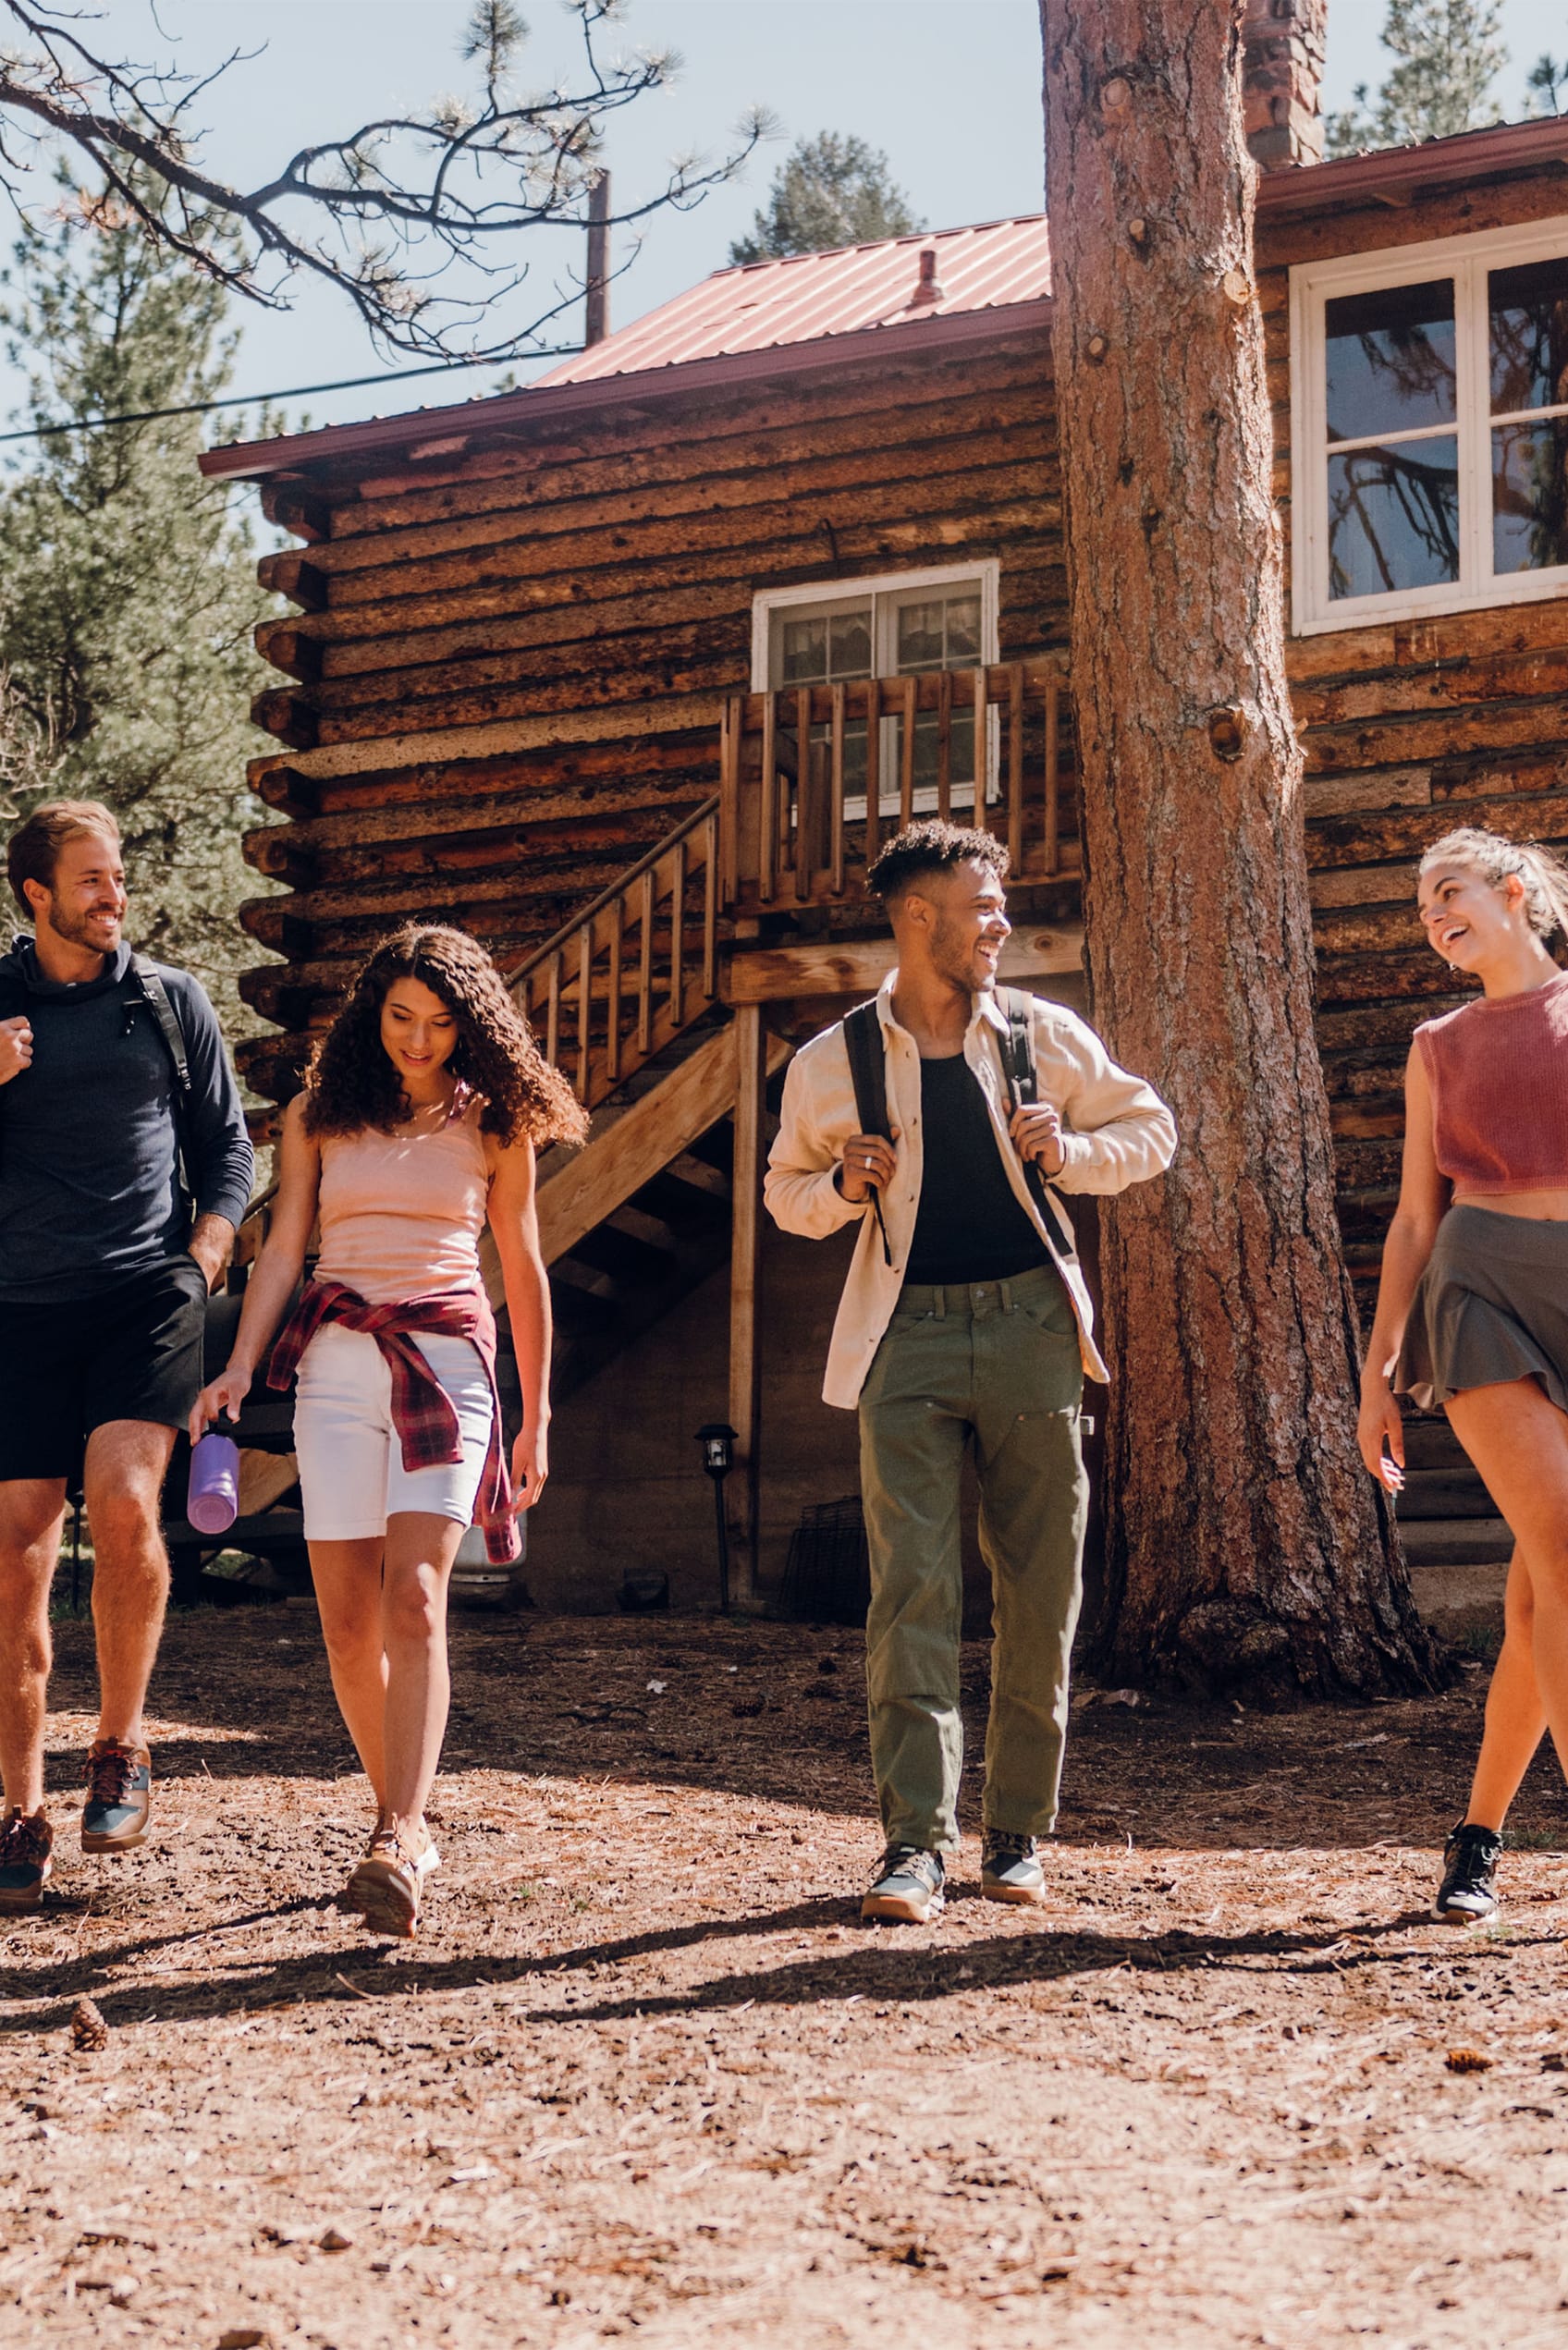 The featured image shows four adults wearing Forsake shoes walking in front of a log cabin.